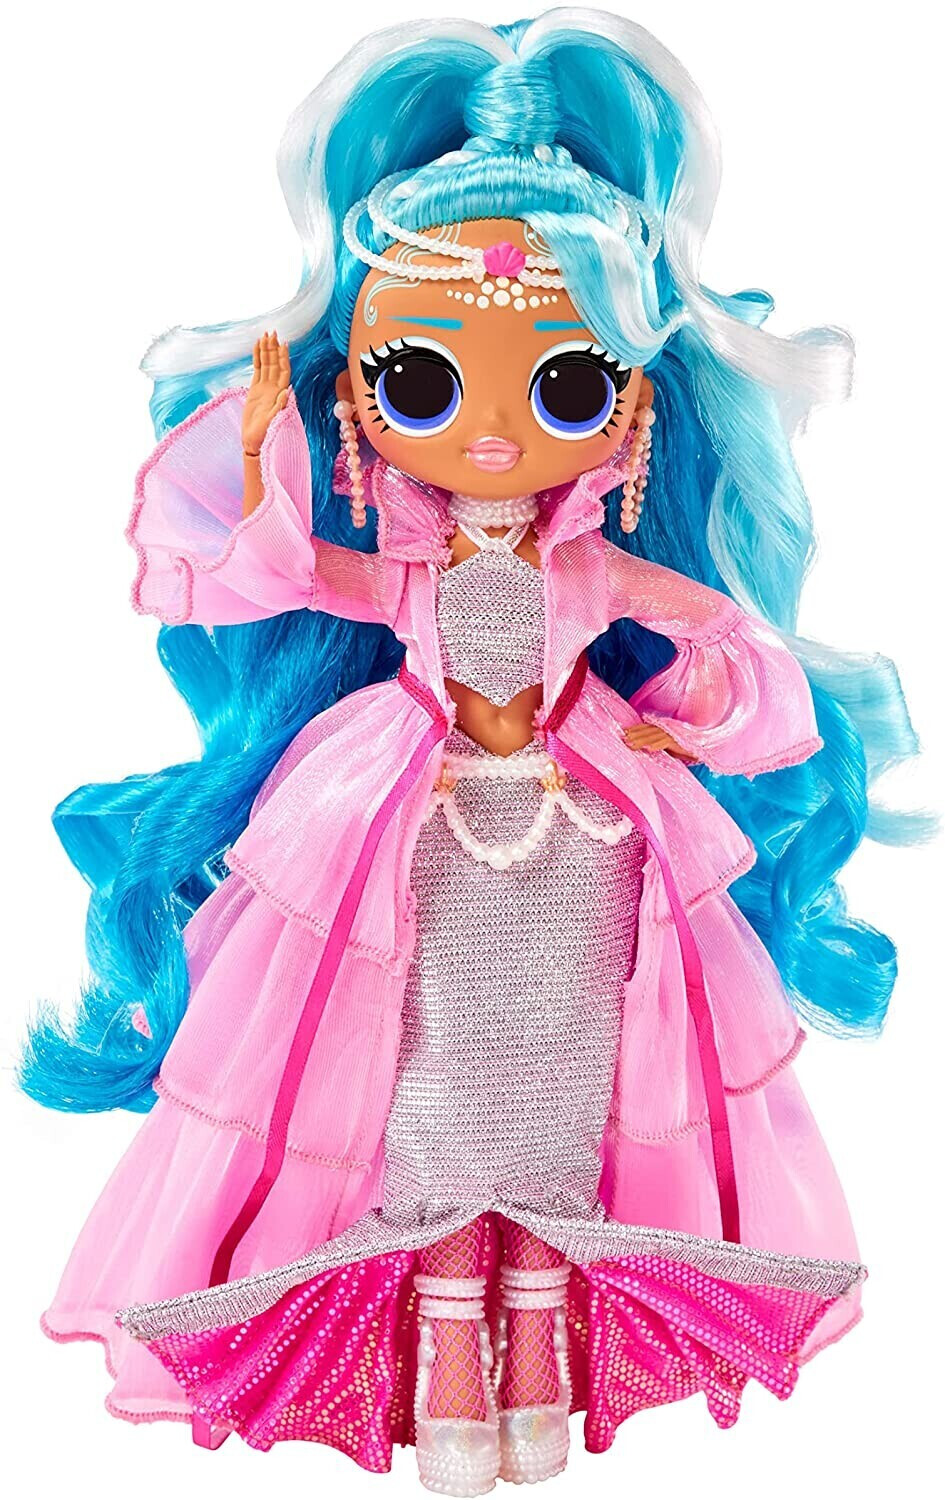 LOL Surprise! OMG Queens: Prism Fashion Doll Review! 